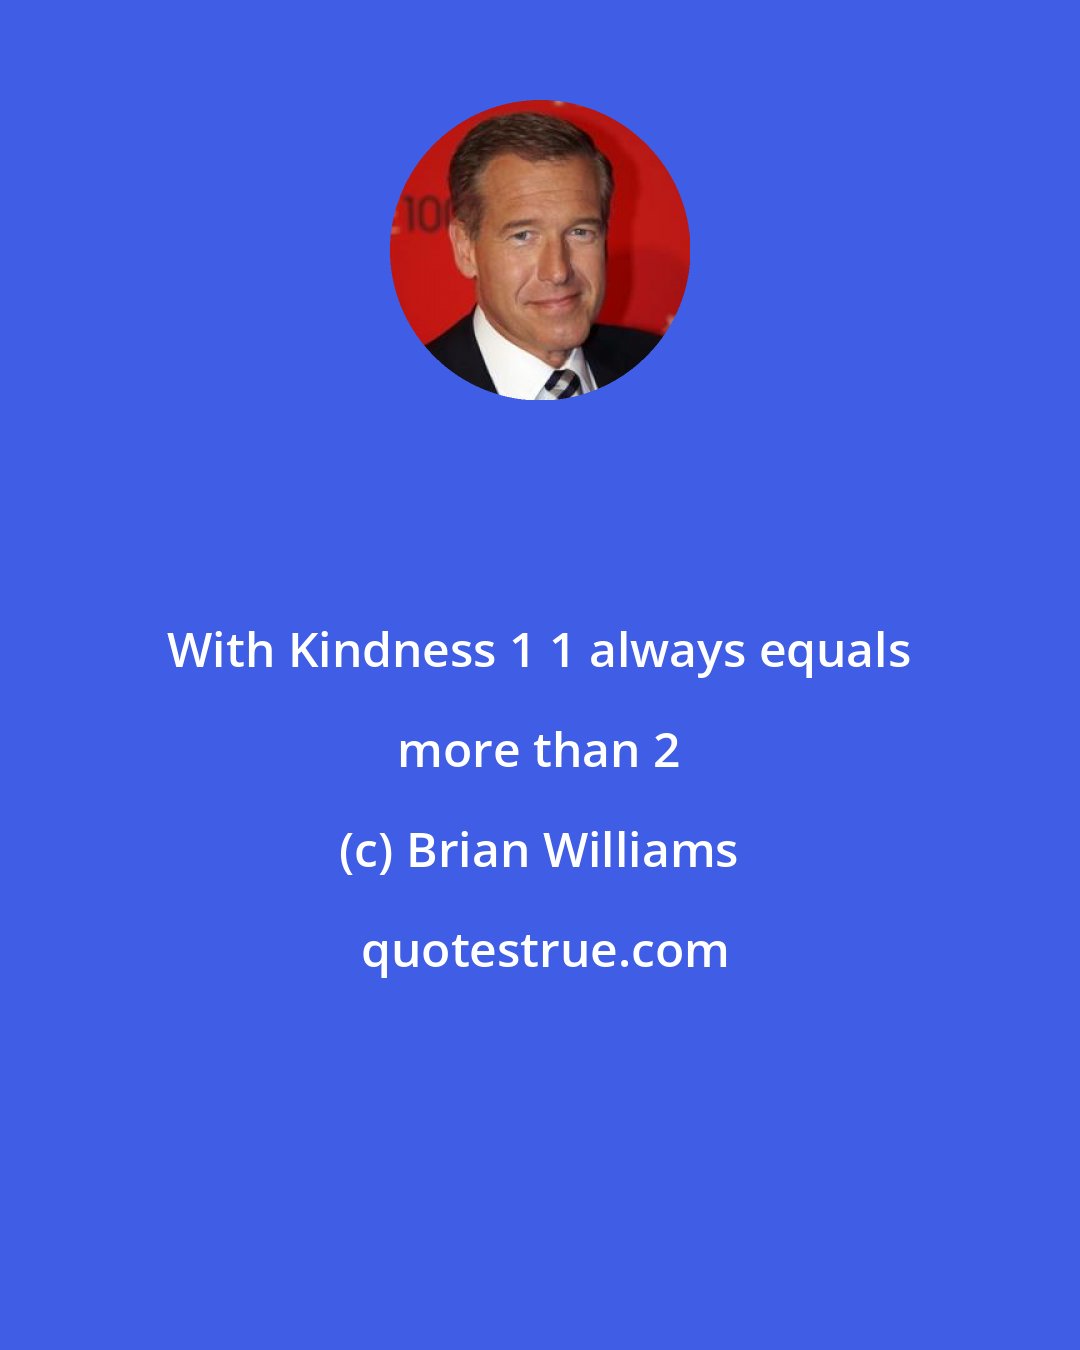 Brian Williams: With Kindness 1+1 always equals more than 2